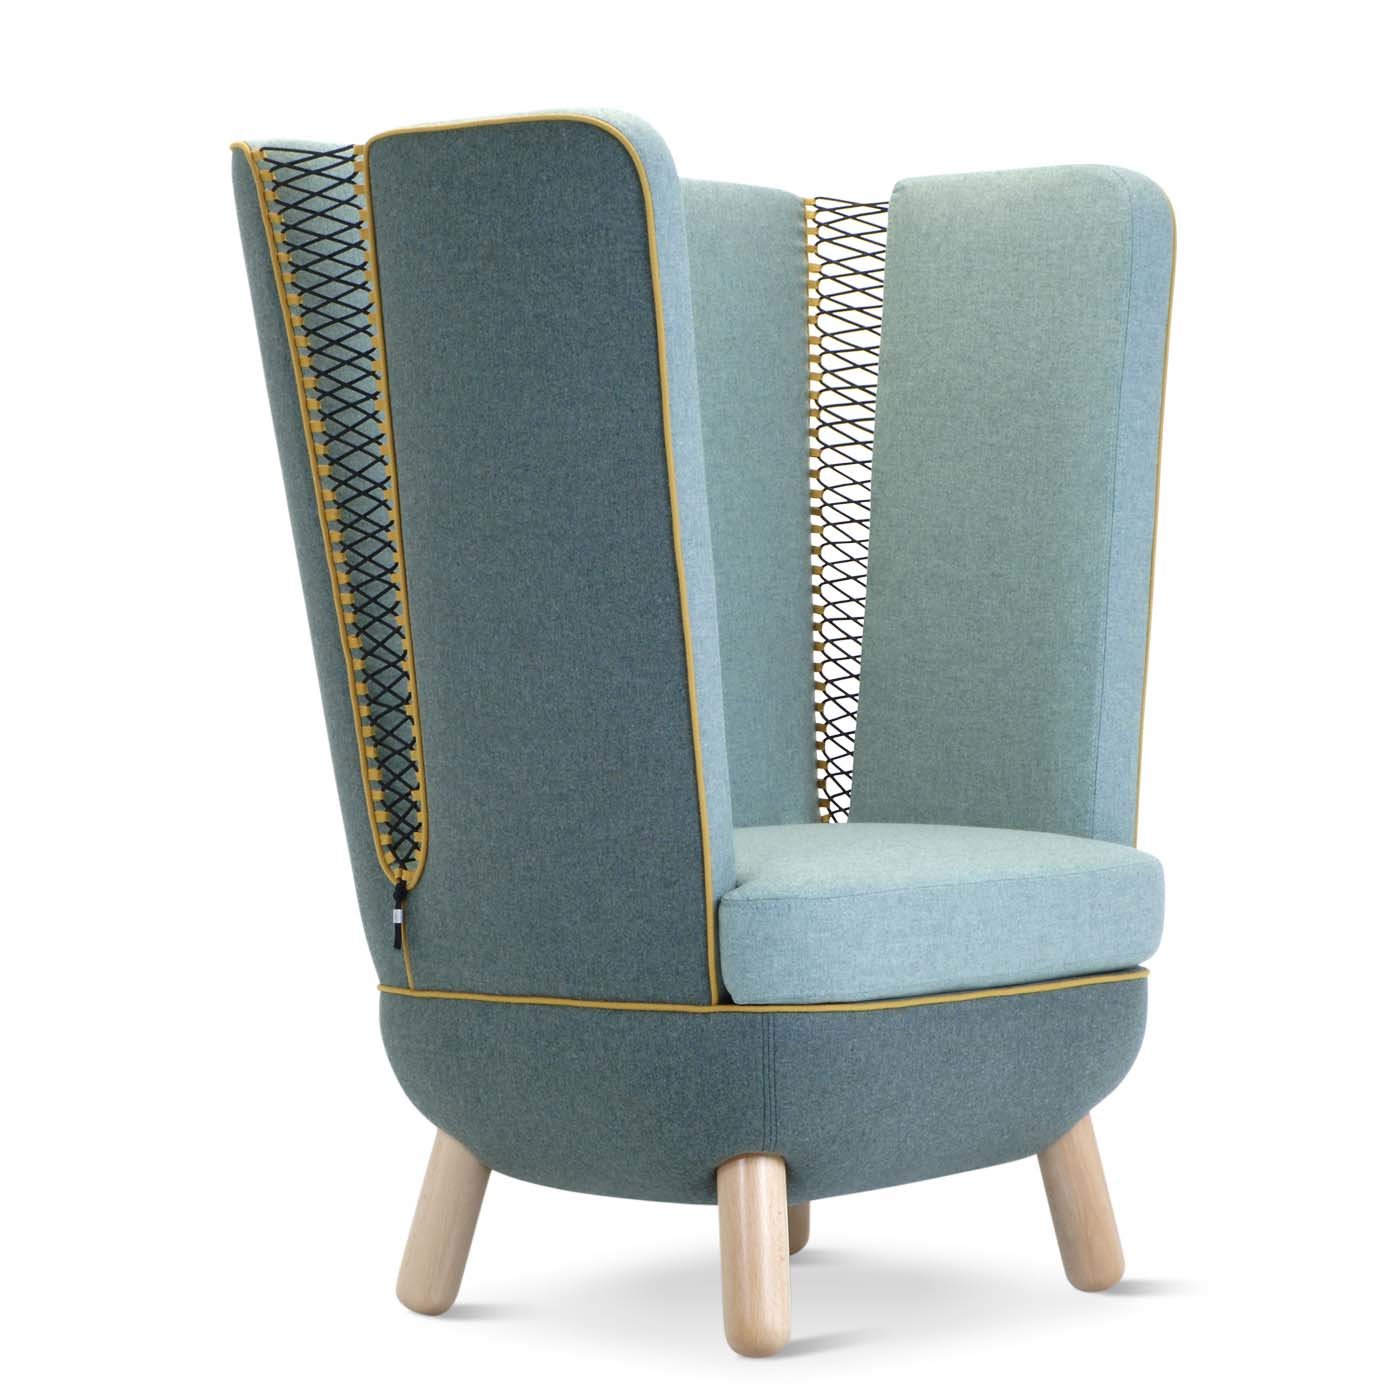 Sly High Armchair By Italo Pertichini - Alternative view 2